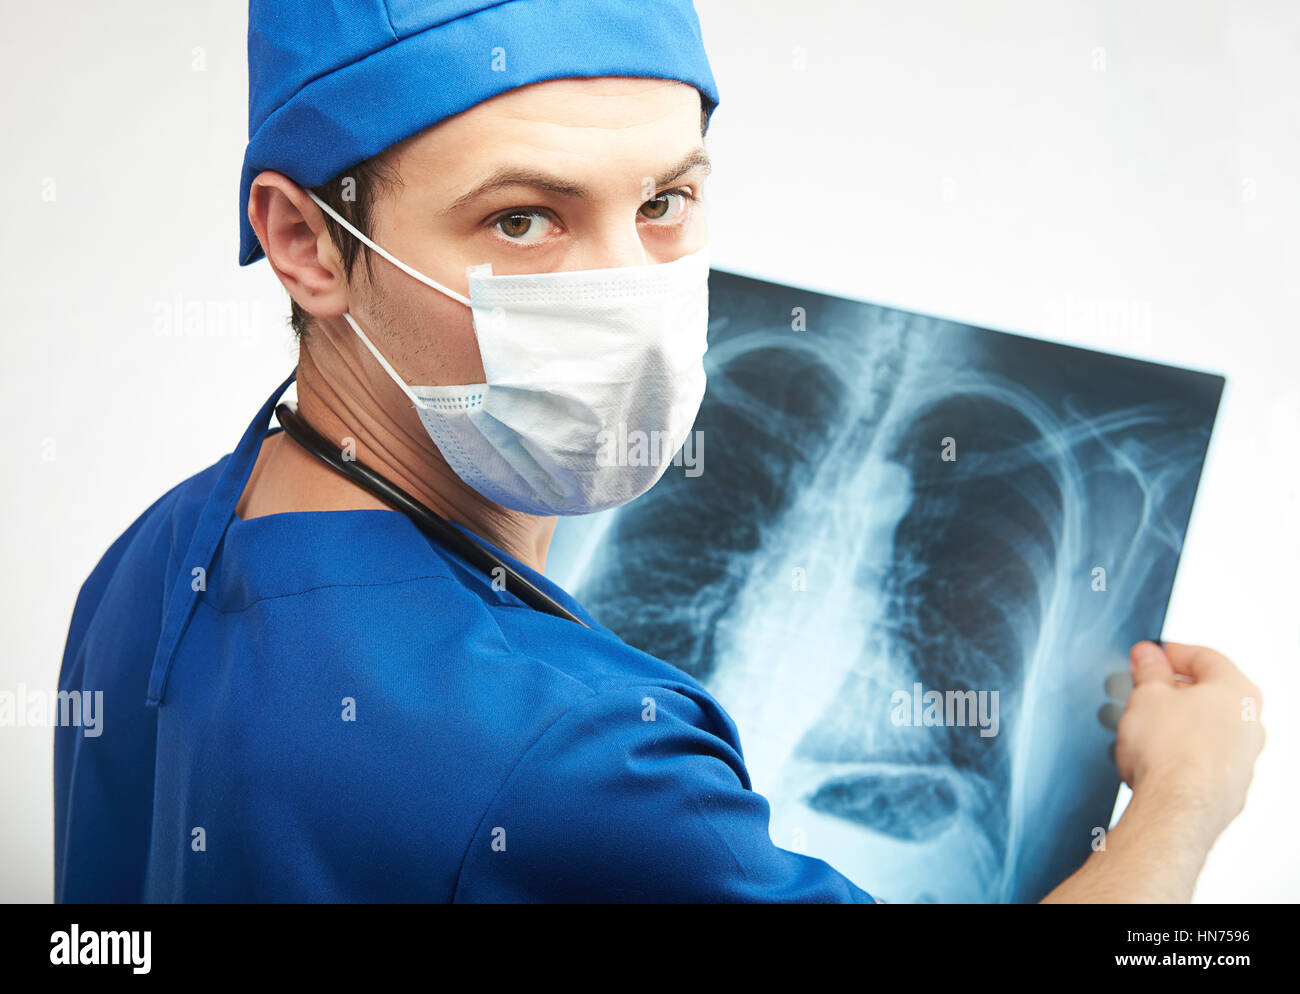 nurse man with x-ray image in hands isolated on white Stock Photo